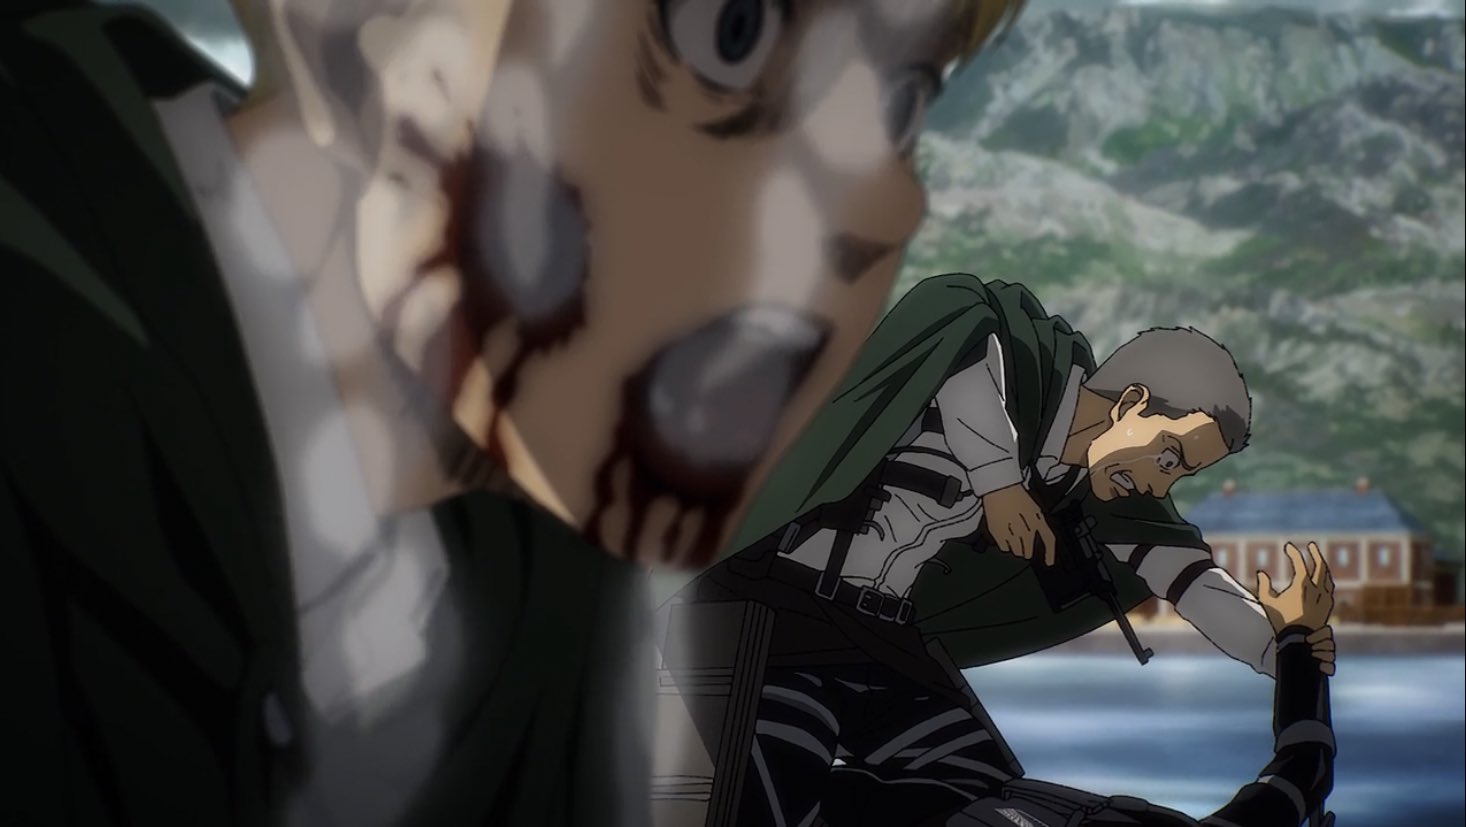 Attack On Titan Episode 80 Release Date And Where To Watch?